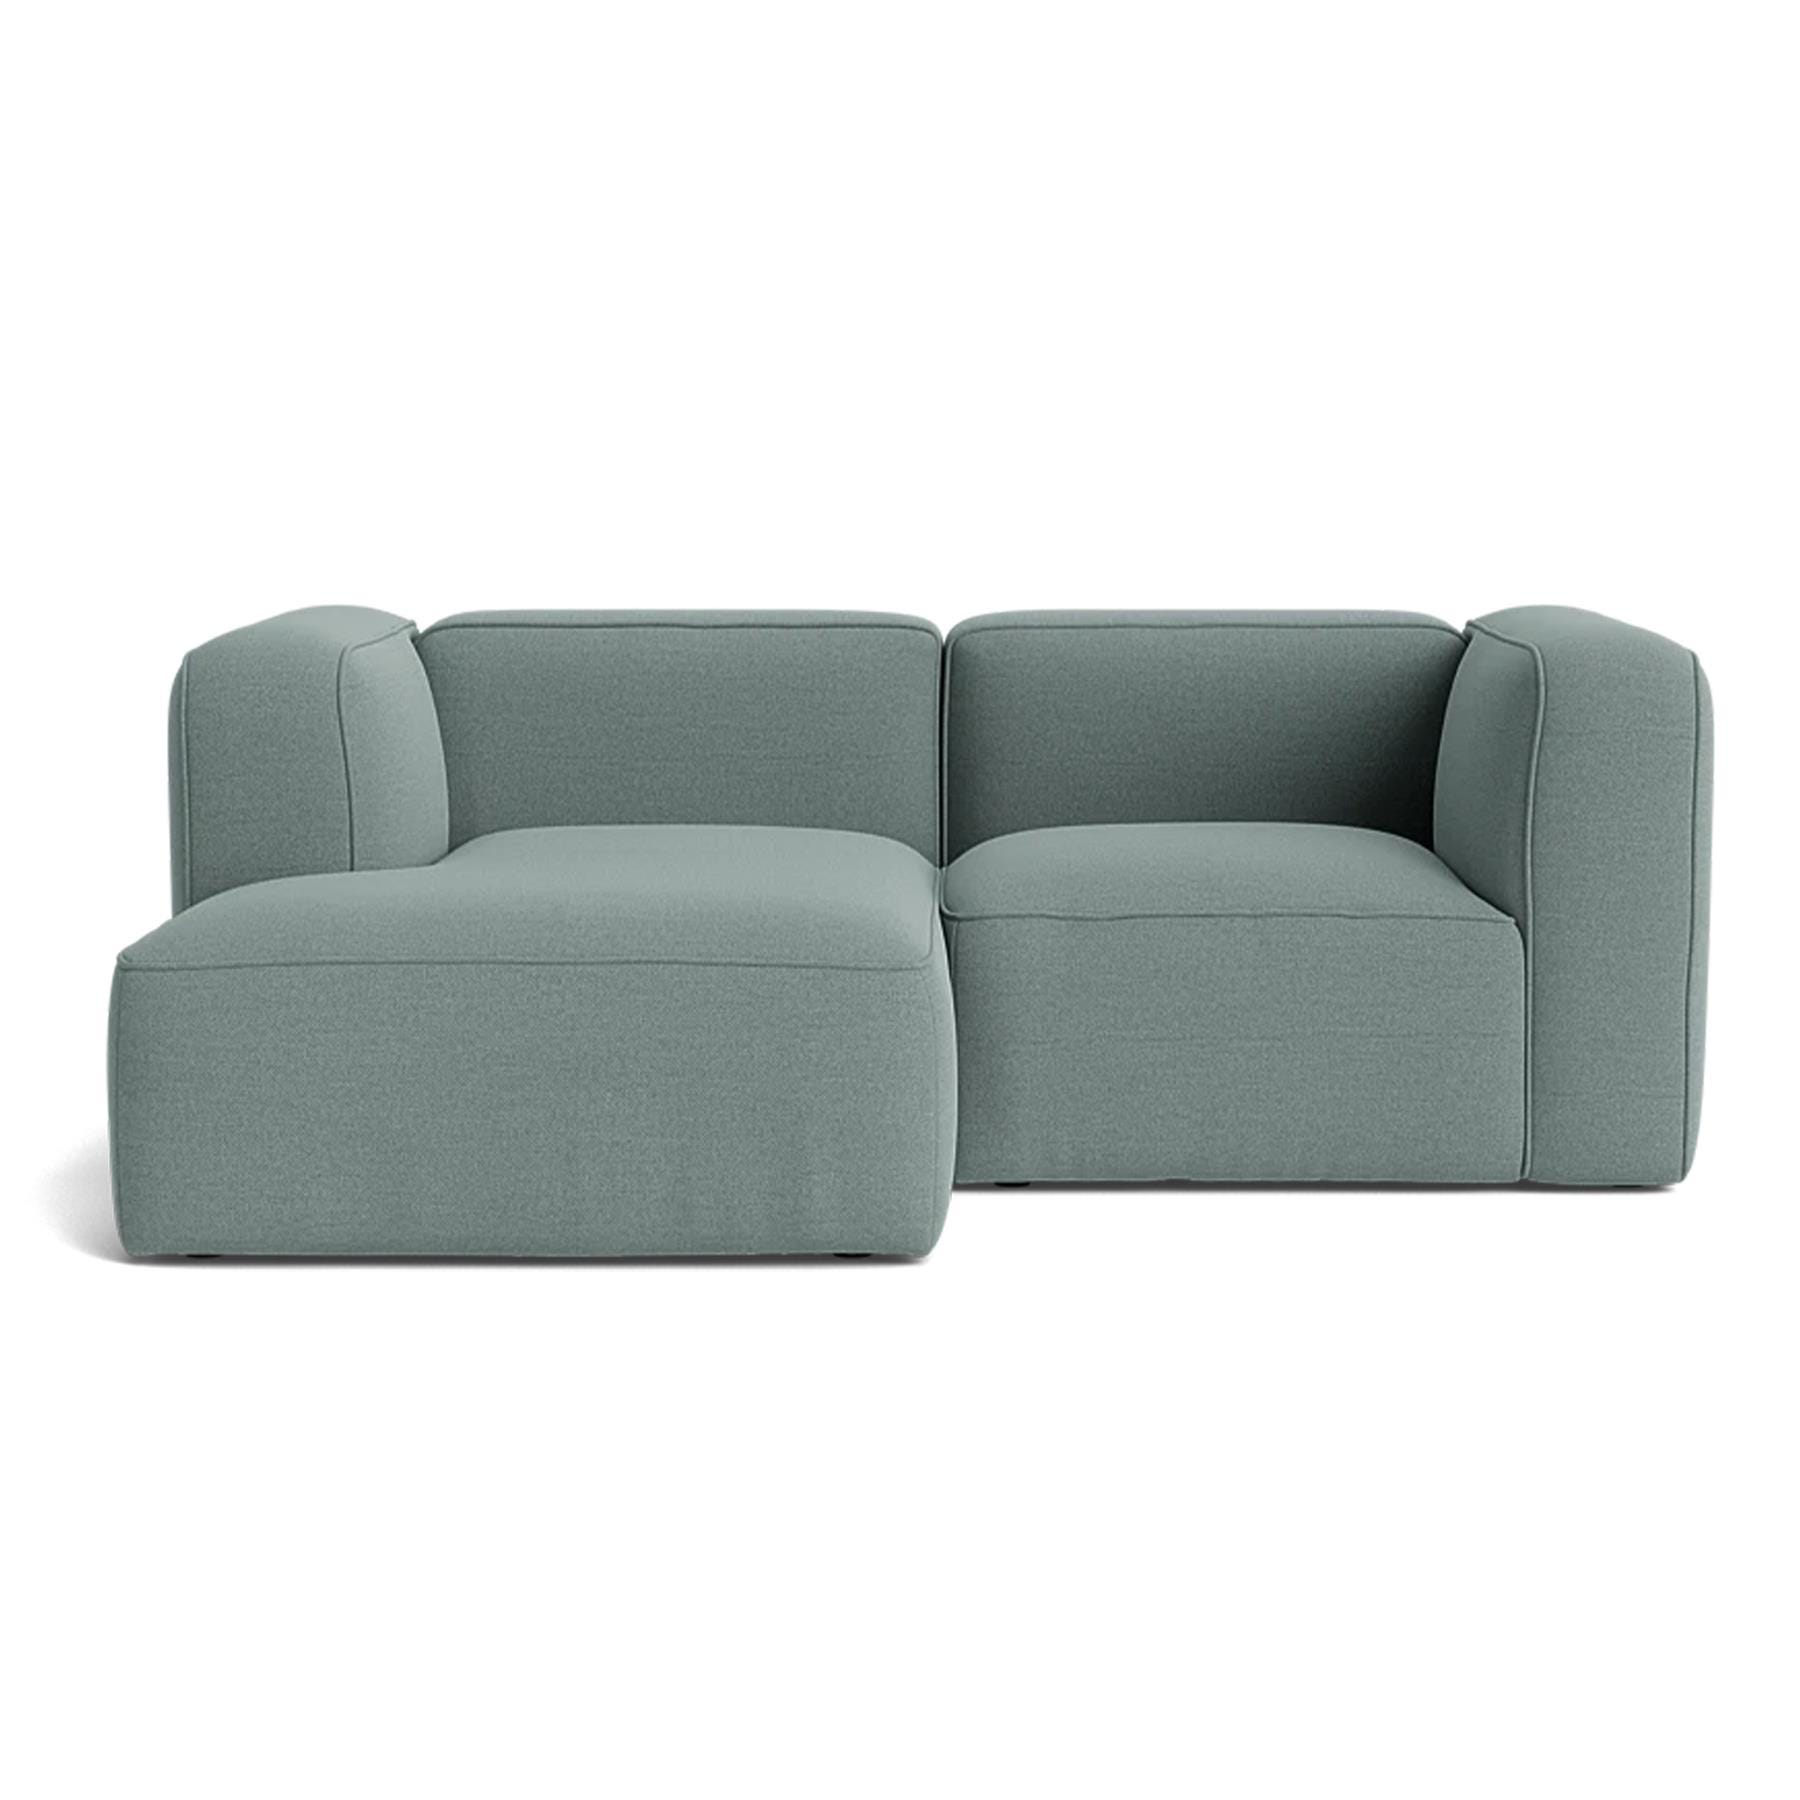 Make Nordic Basecamp Small Sofa Rewool 868 Left Green Designer Furniture From Holloways Of Ludlow